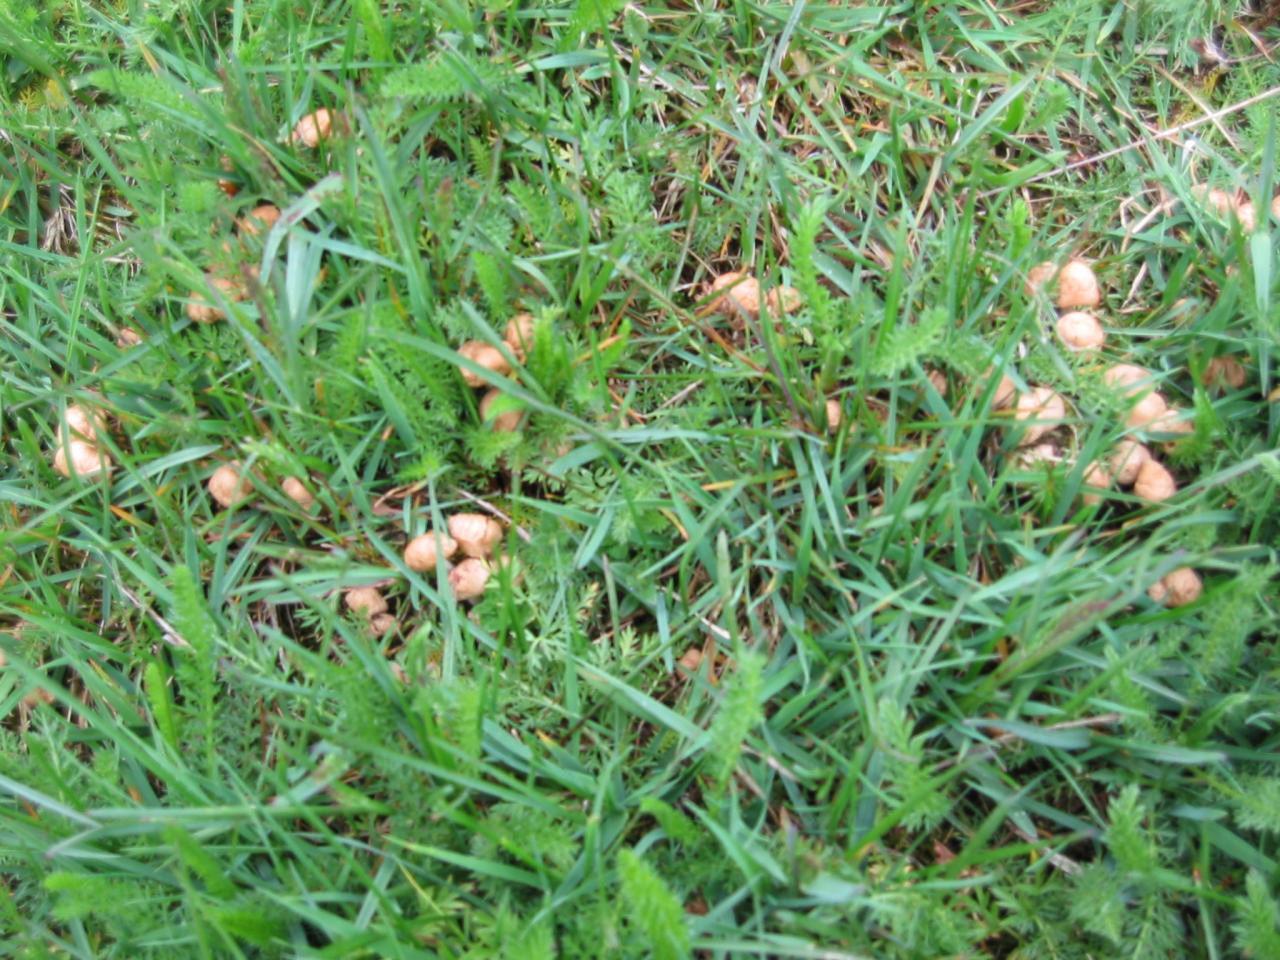 The first one meadow mushrooms in May